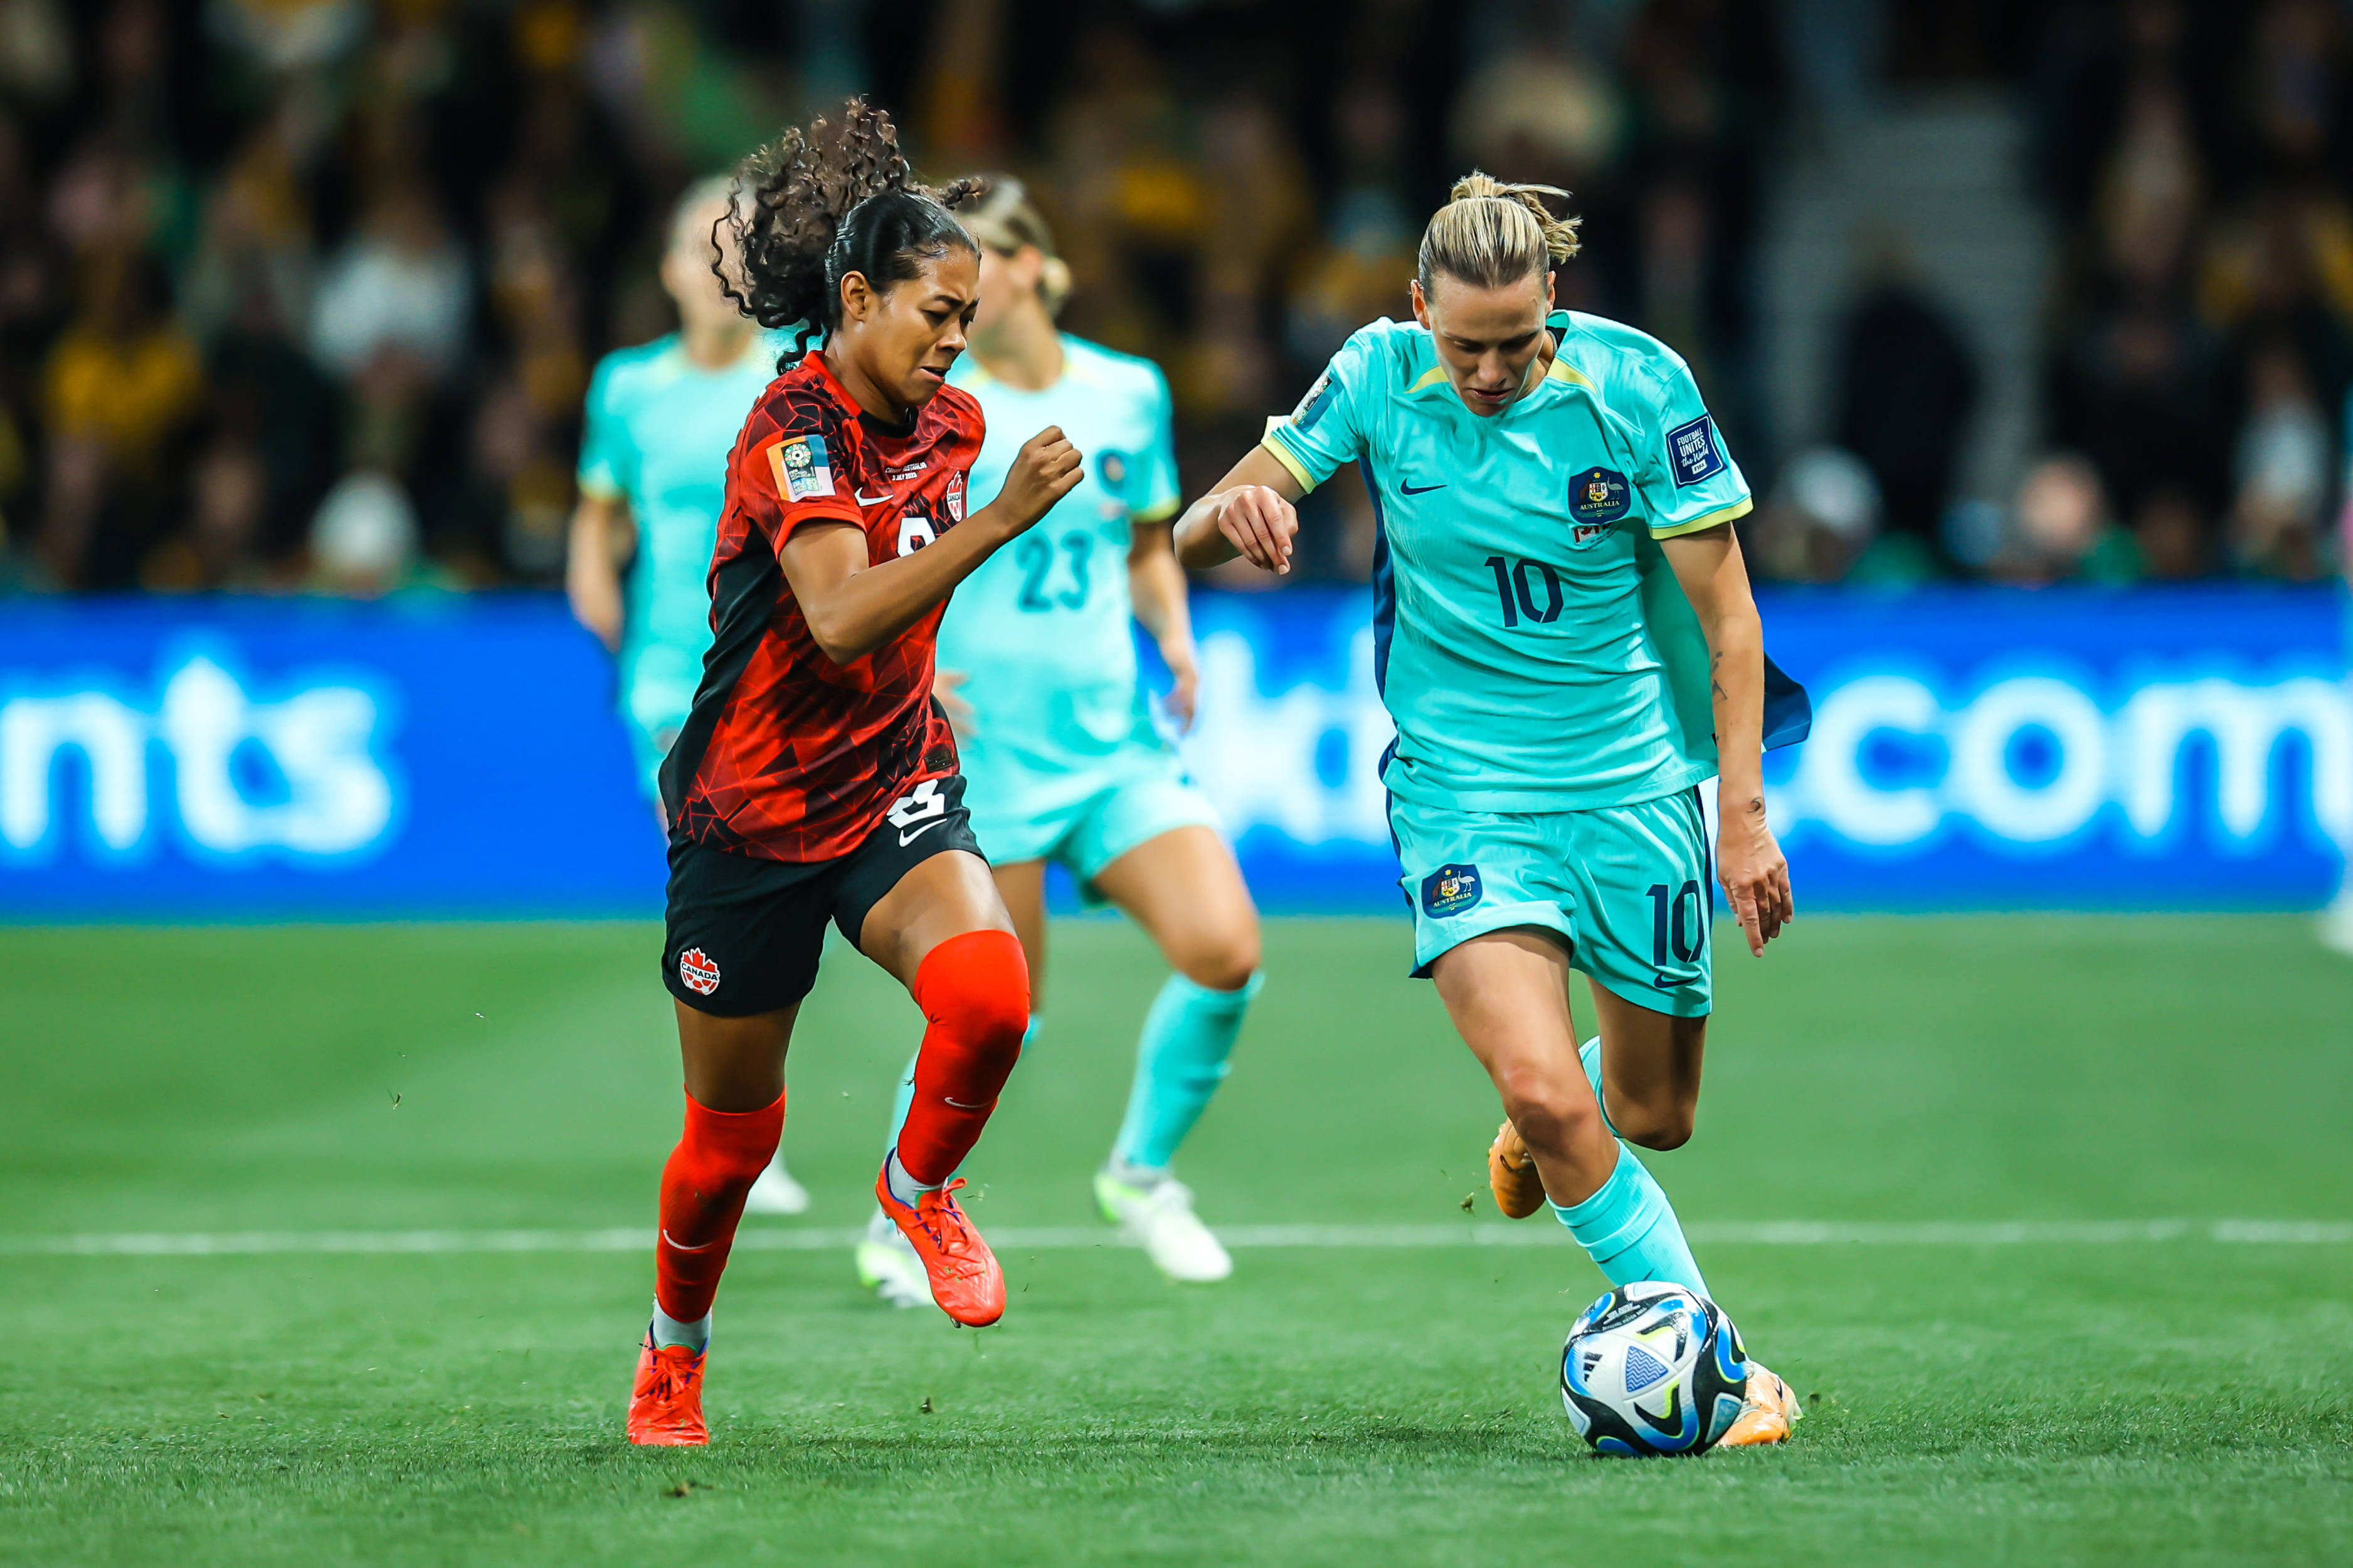 Emily VAN EGMOND of Australia and Jayde RIVIERE of Canada compete as Australia plays Canada at the FIFA Women s World Cup Australia & New Zealand 2023 at Melbourne Rectangular Stadium 